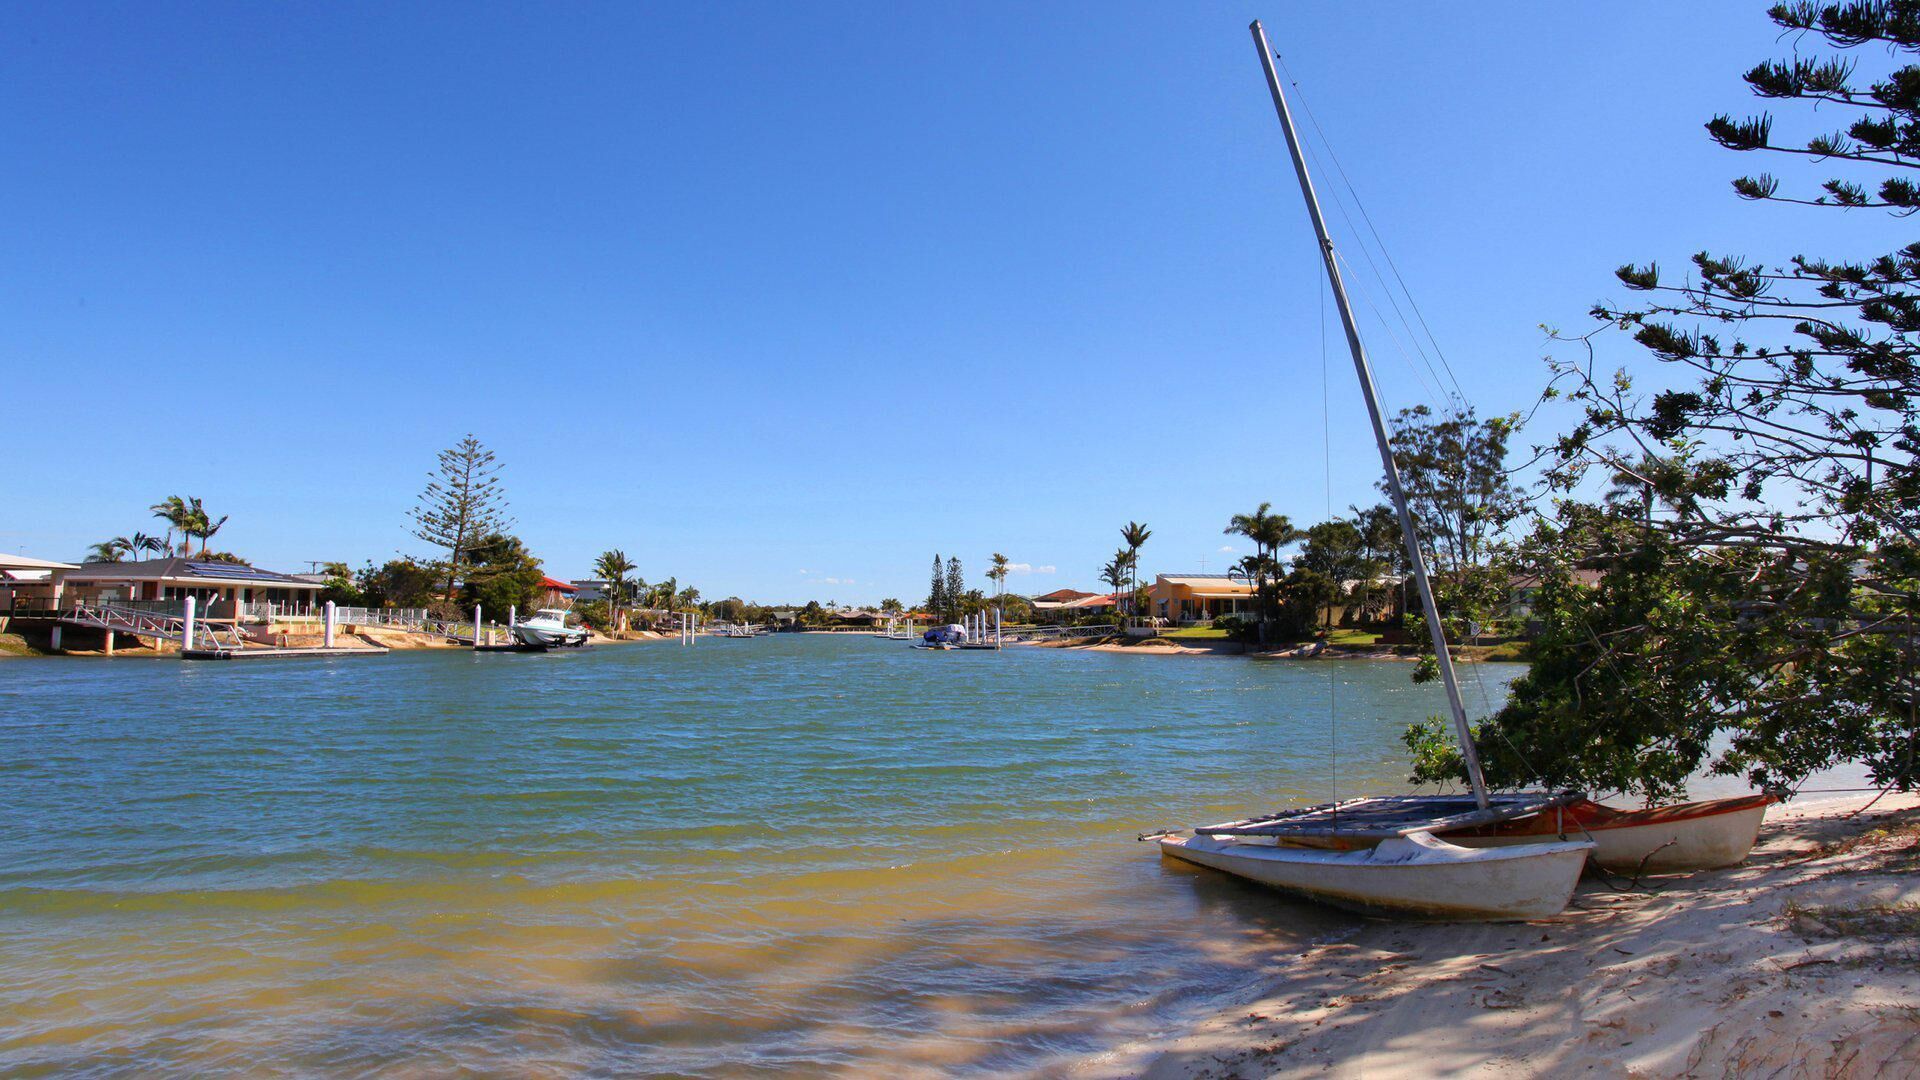 Anjuna 2 - Canal Front 2 Bedroom Apartment - Short Walk to Mooloolaba Beach and Cafes!